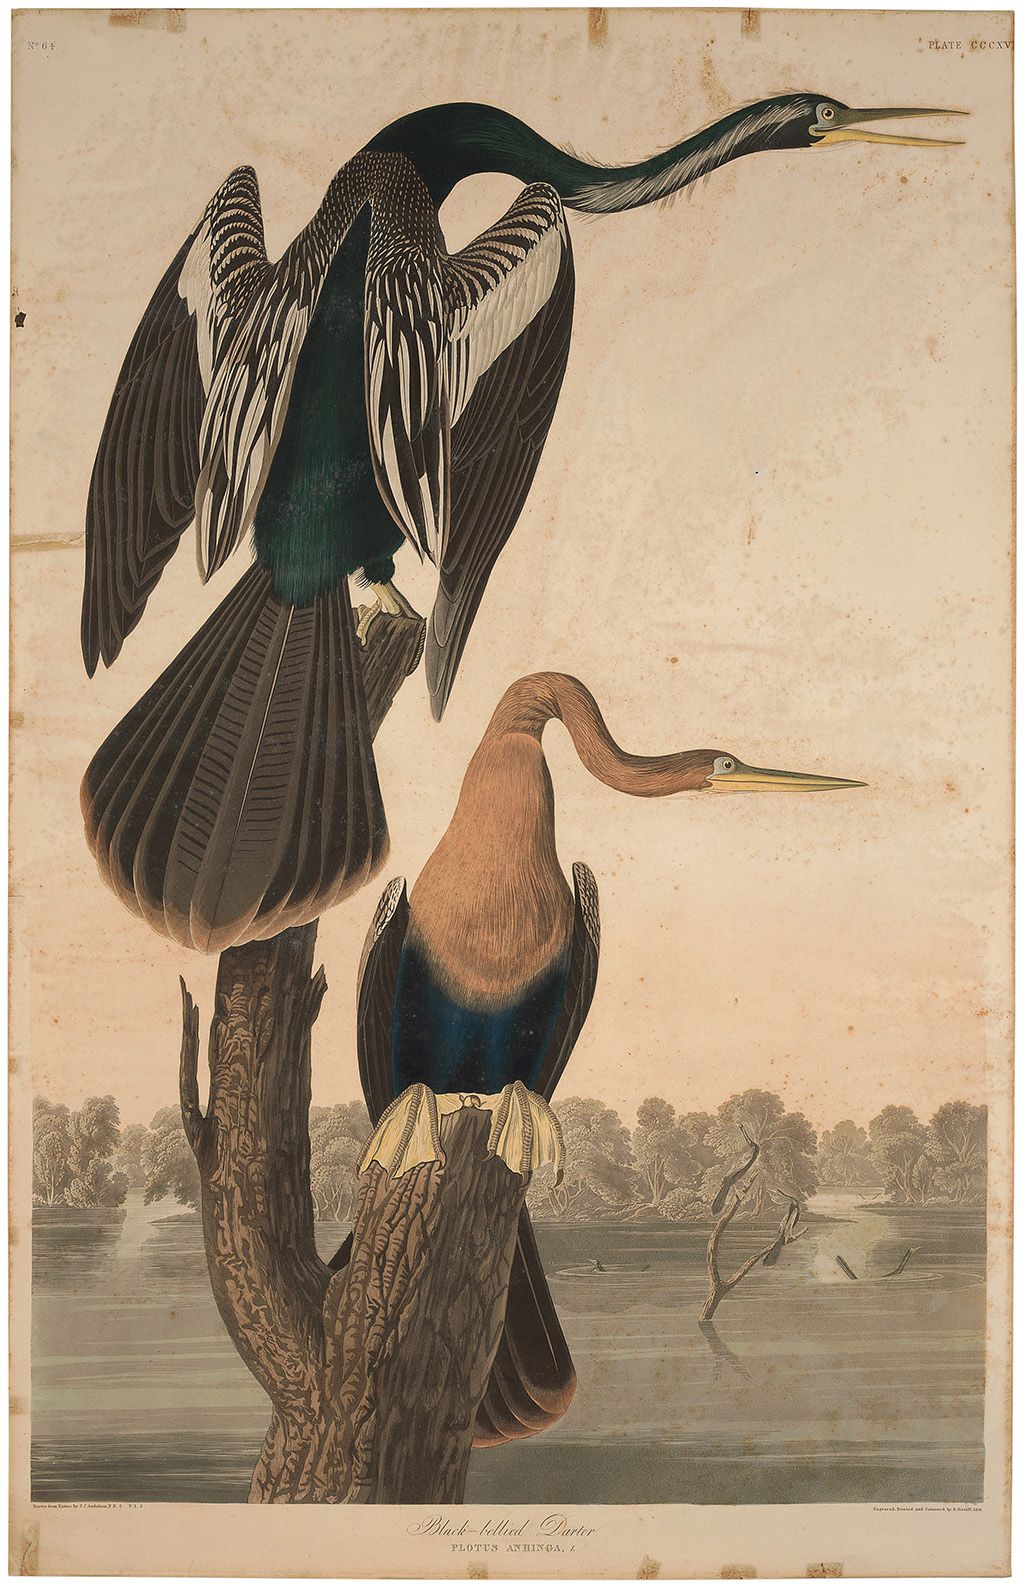 This Havell Edition Audubon hand-colored aquatint engraving was brought back to life after removing the improper repairs to the tears.